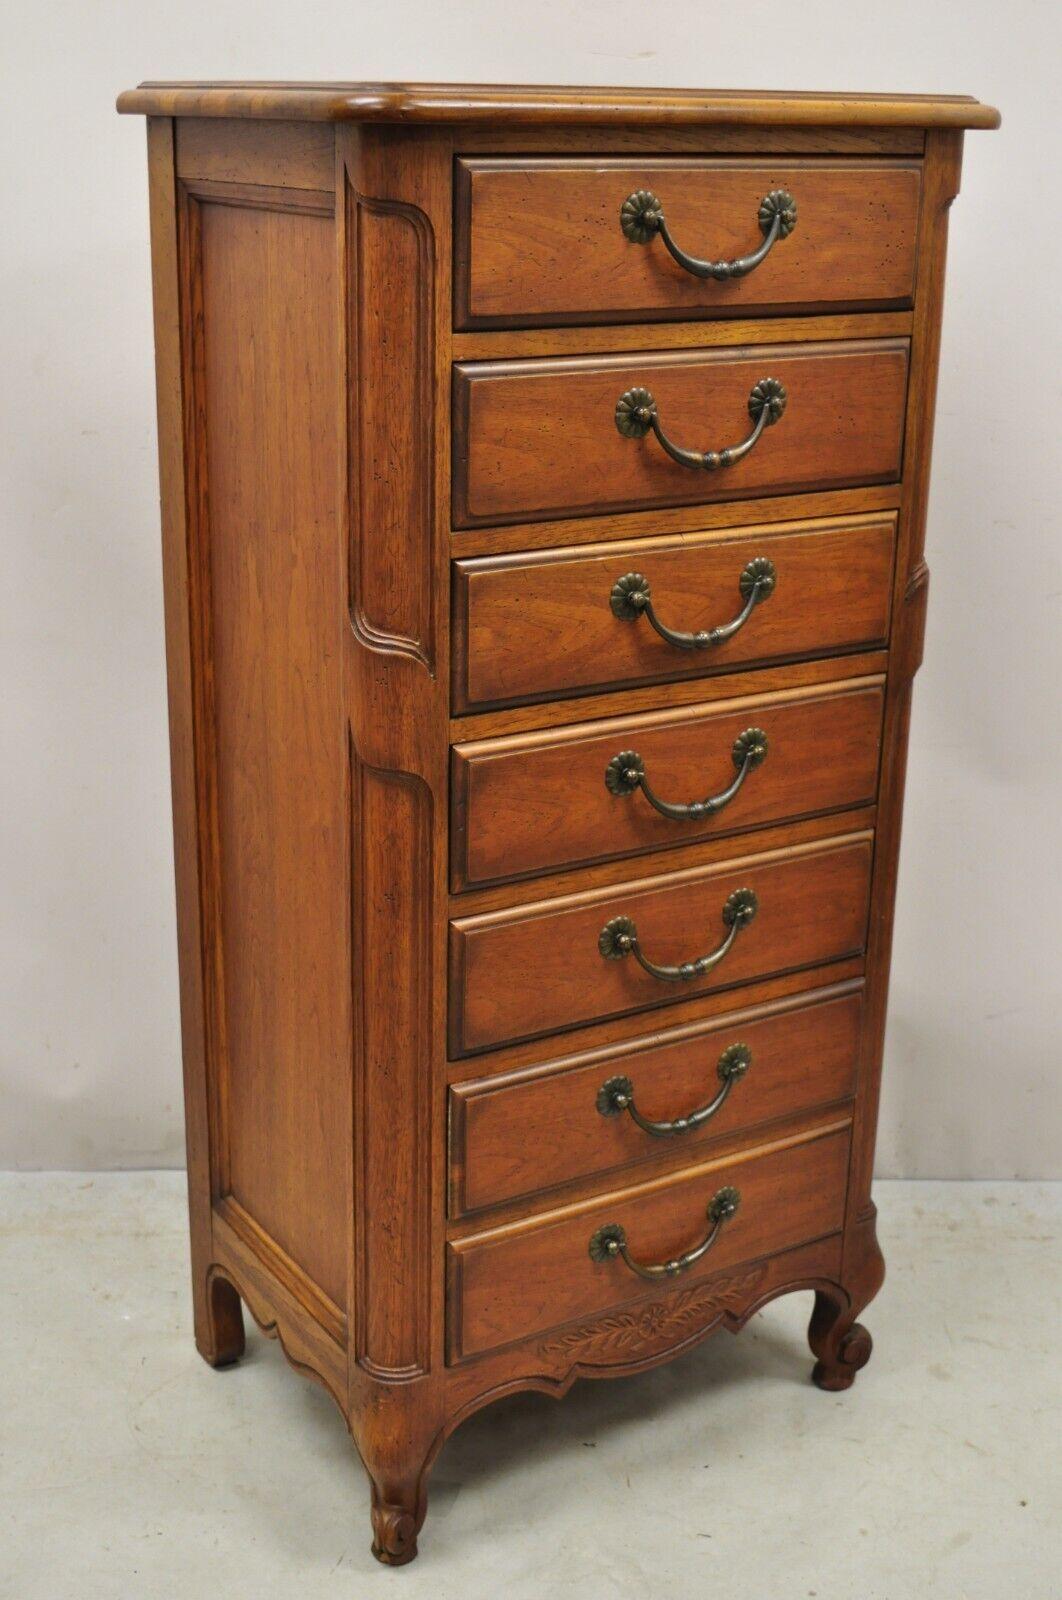 Vintage Drexel French Country Manner 7 Drawer Lingerie Chest & Drawers. Item features solid wood construction, beautiful wood grain, original stamp, cabriole legs, 7 dovetailed drawers, solid brass hardware, very nice vintage item, great style and